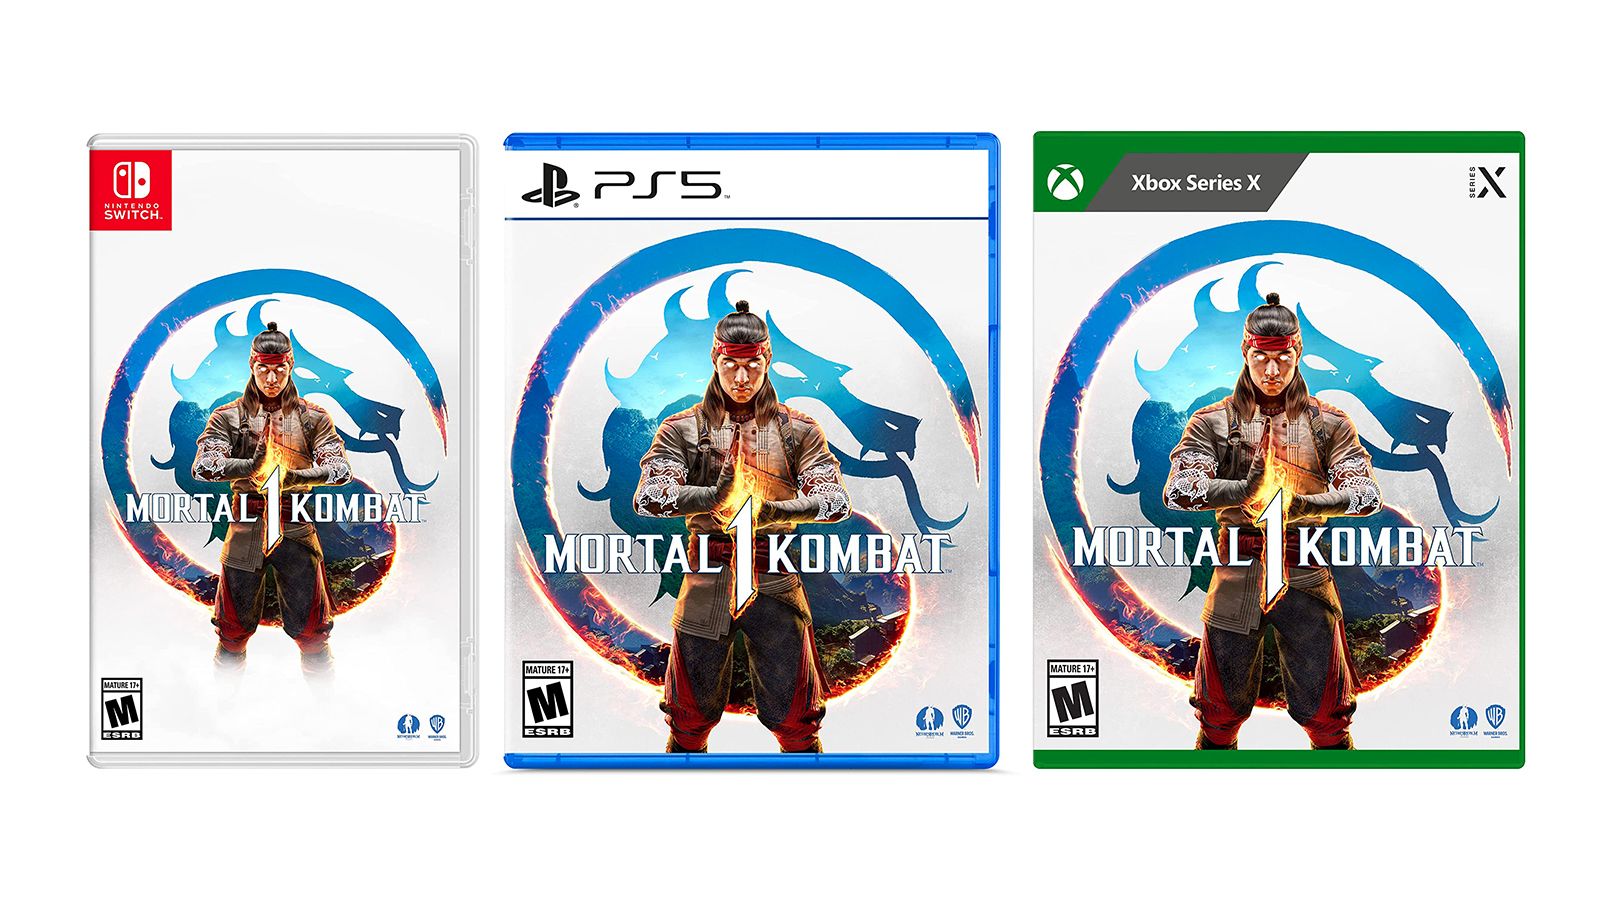 Mortal Kombat 1 PS5 Vs Nintendo Switch: Which One is Better